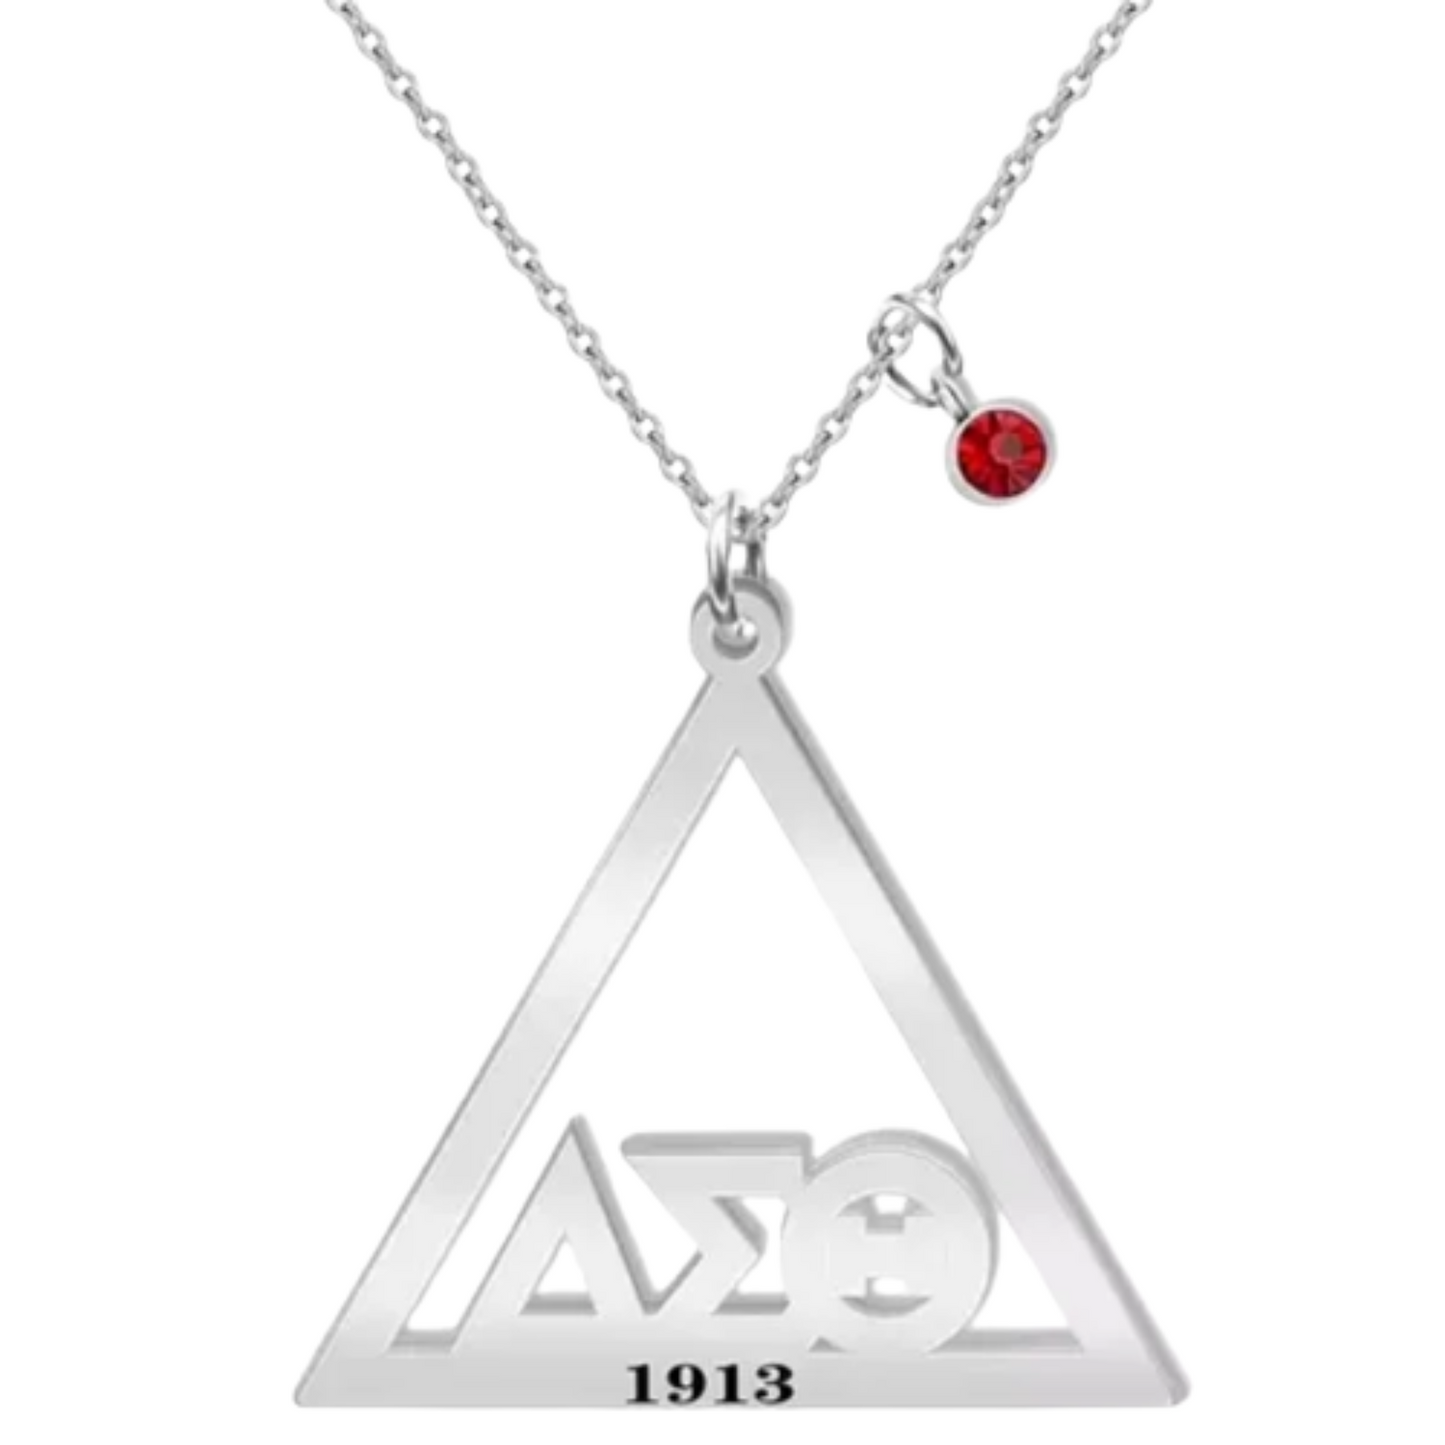 DST Stainless steel necklace with Greek sorority letters and 1913 